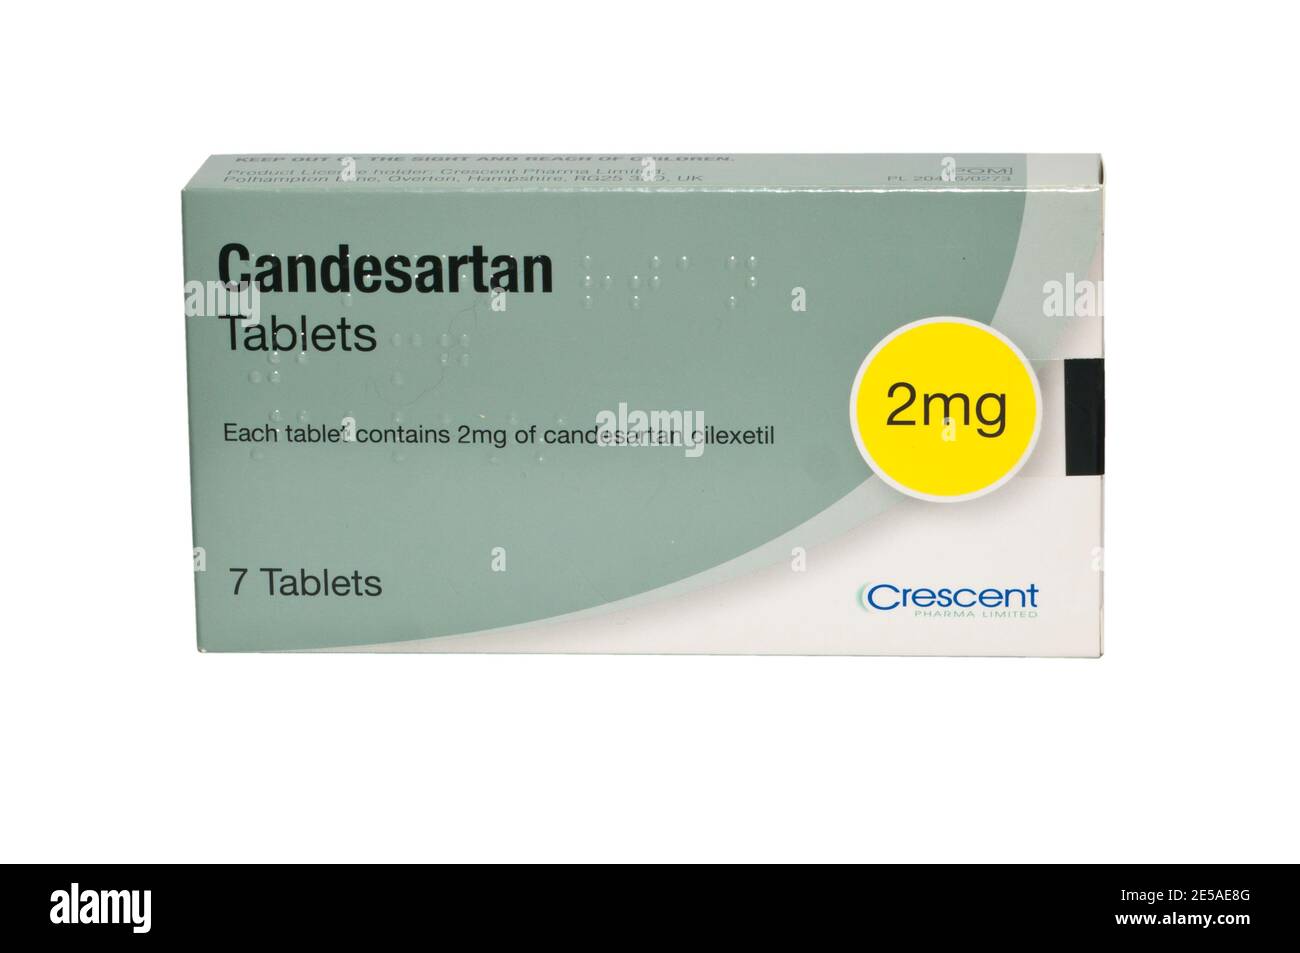 Pack Packet Box Of Candesartan 2mg Tablets Stock Photo